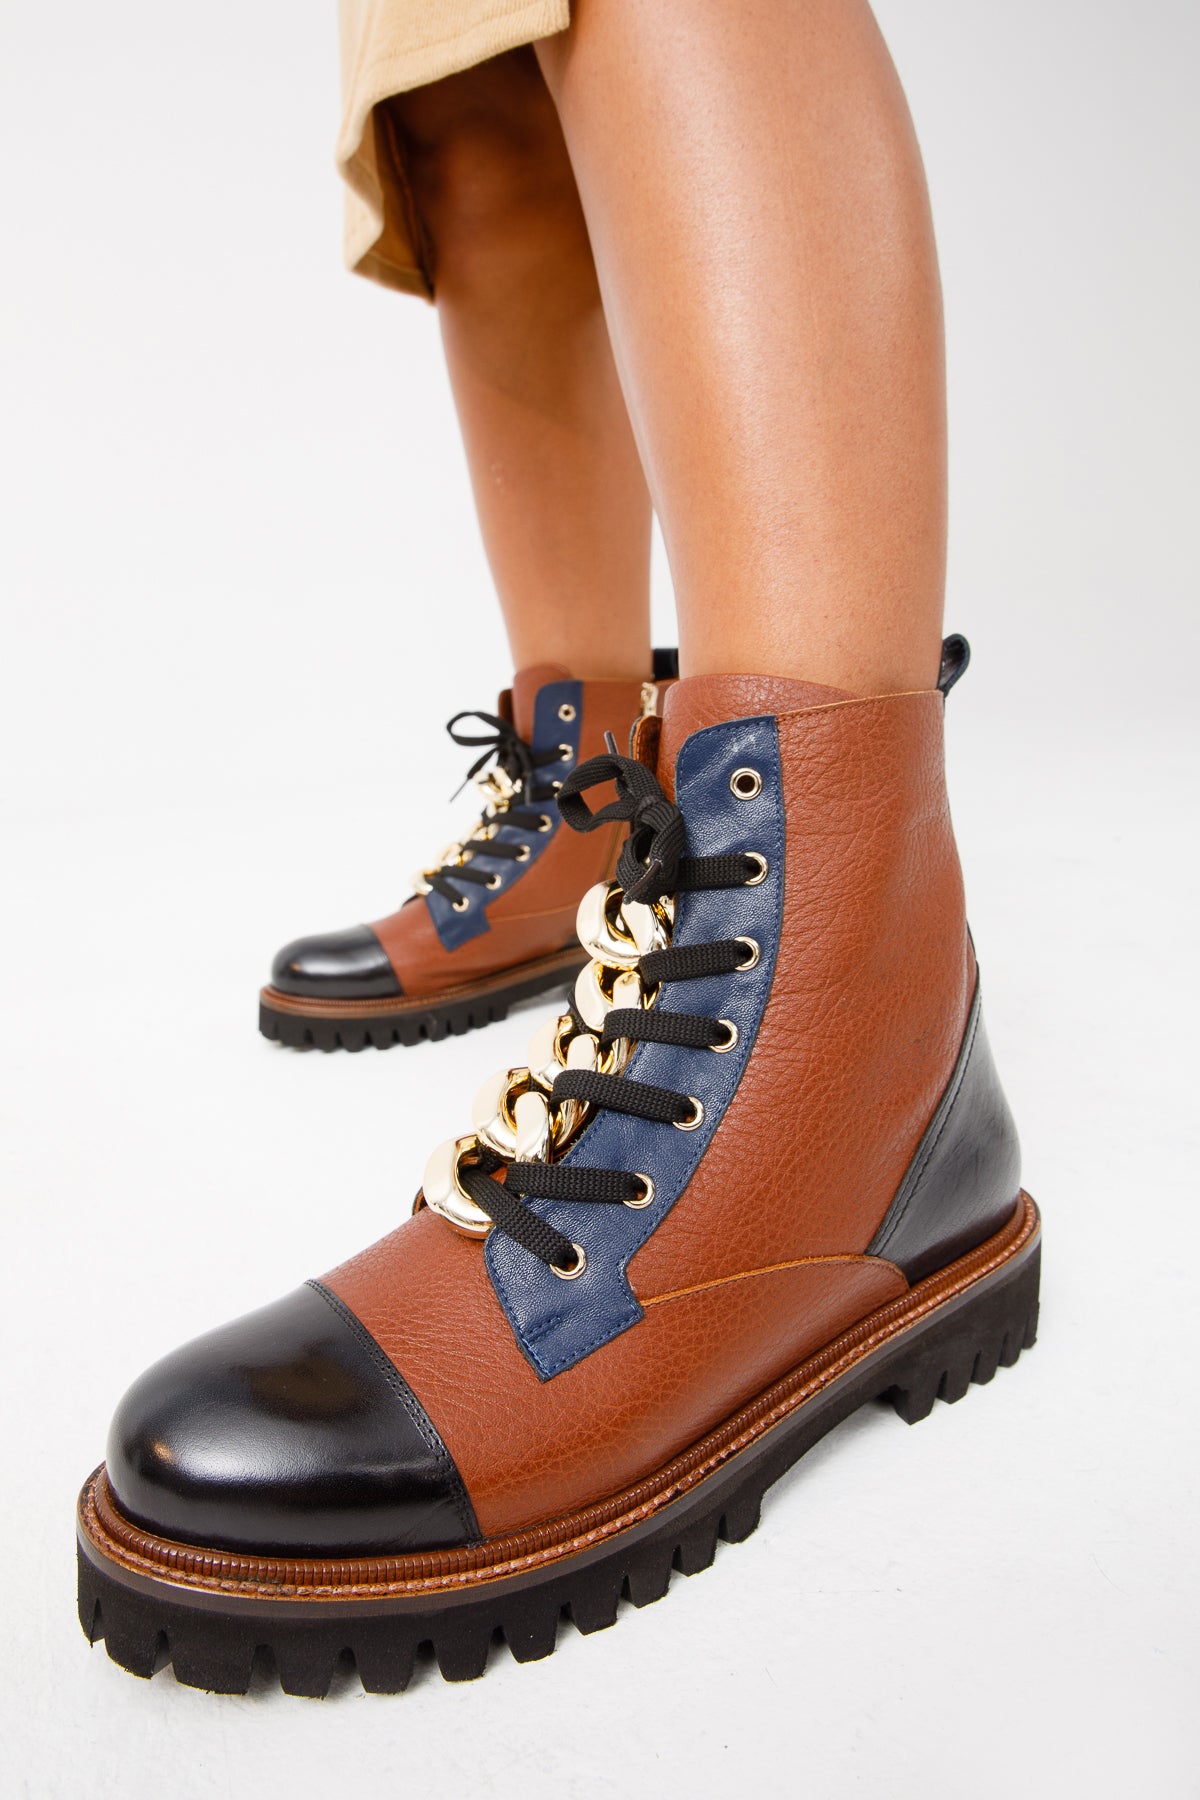 The Belgrad Brown  Leather Lace-Up Ankle Women Boot With a Side Zipper